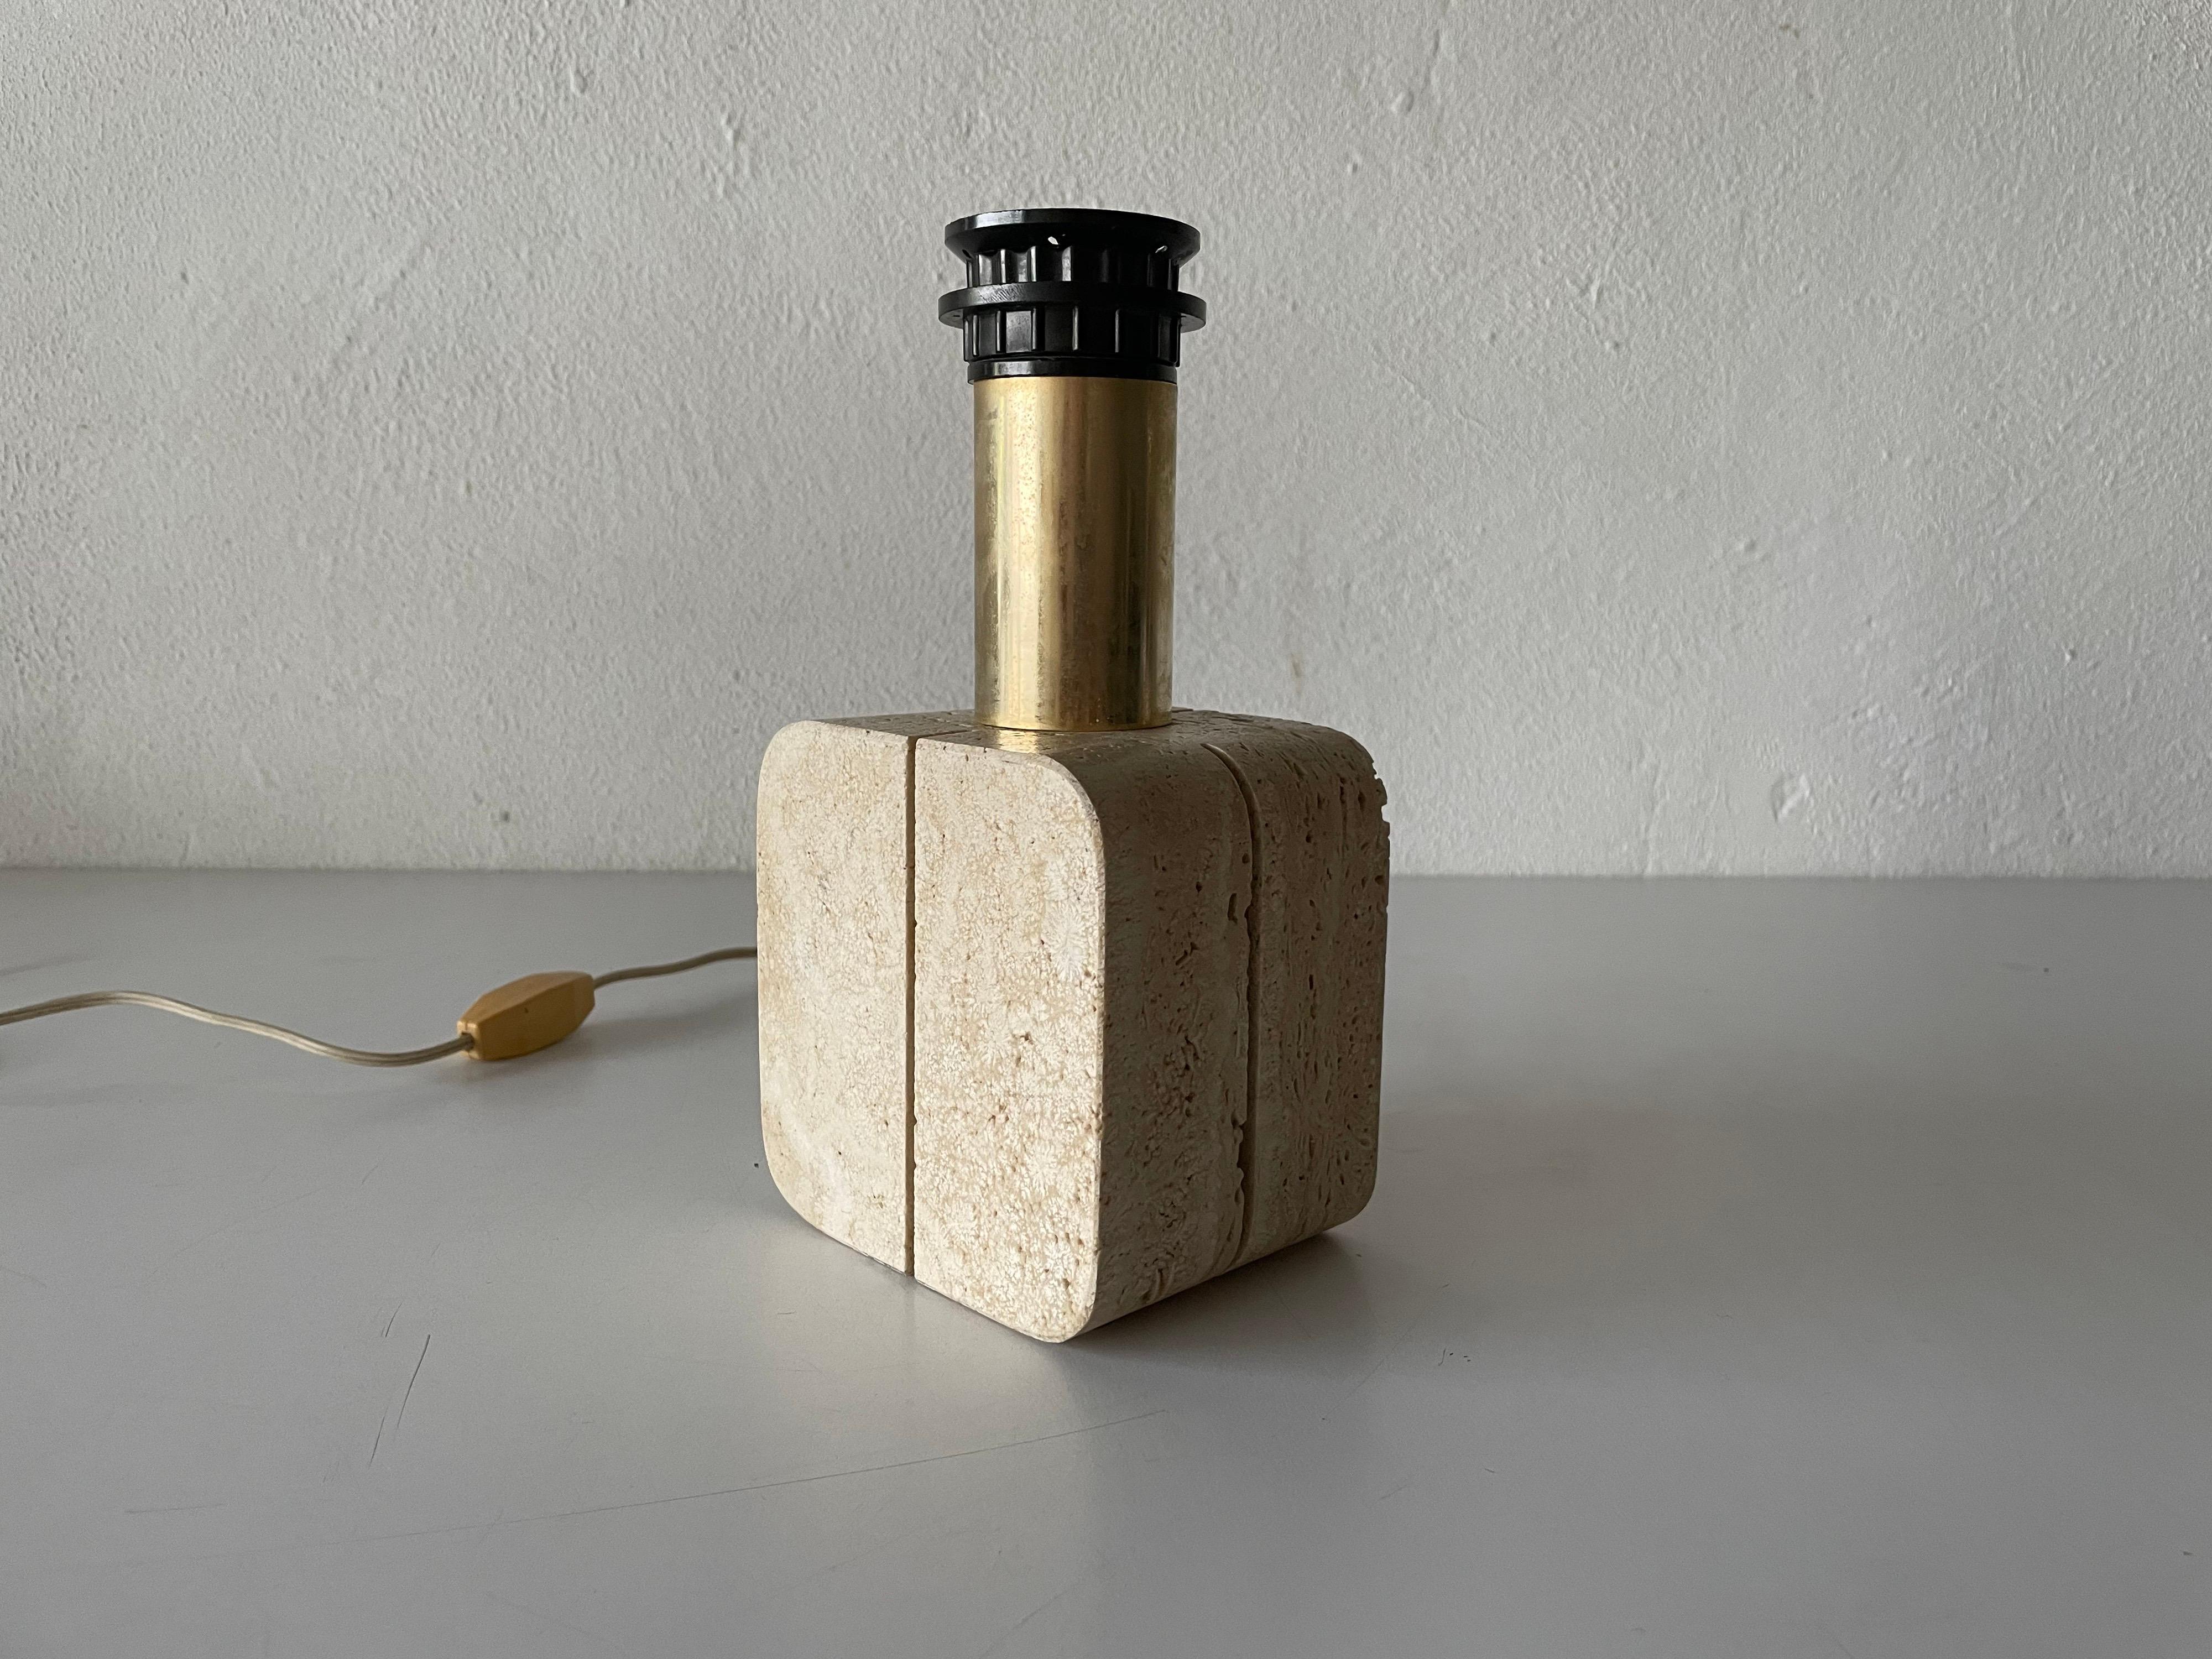 Travertine small nightstand lamp by Nucleo Sormani, 1970s, Italy
without fabric shade

Minimal design
Very high quality.
Fully functional.


Original cable and plug. This lamp is suitable for EU plug socket. Switch on-off on the